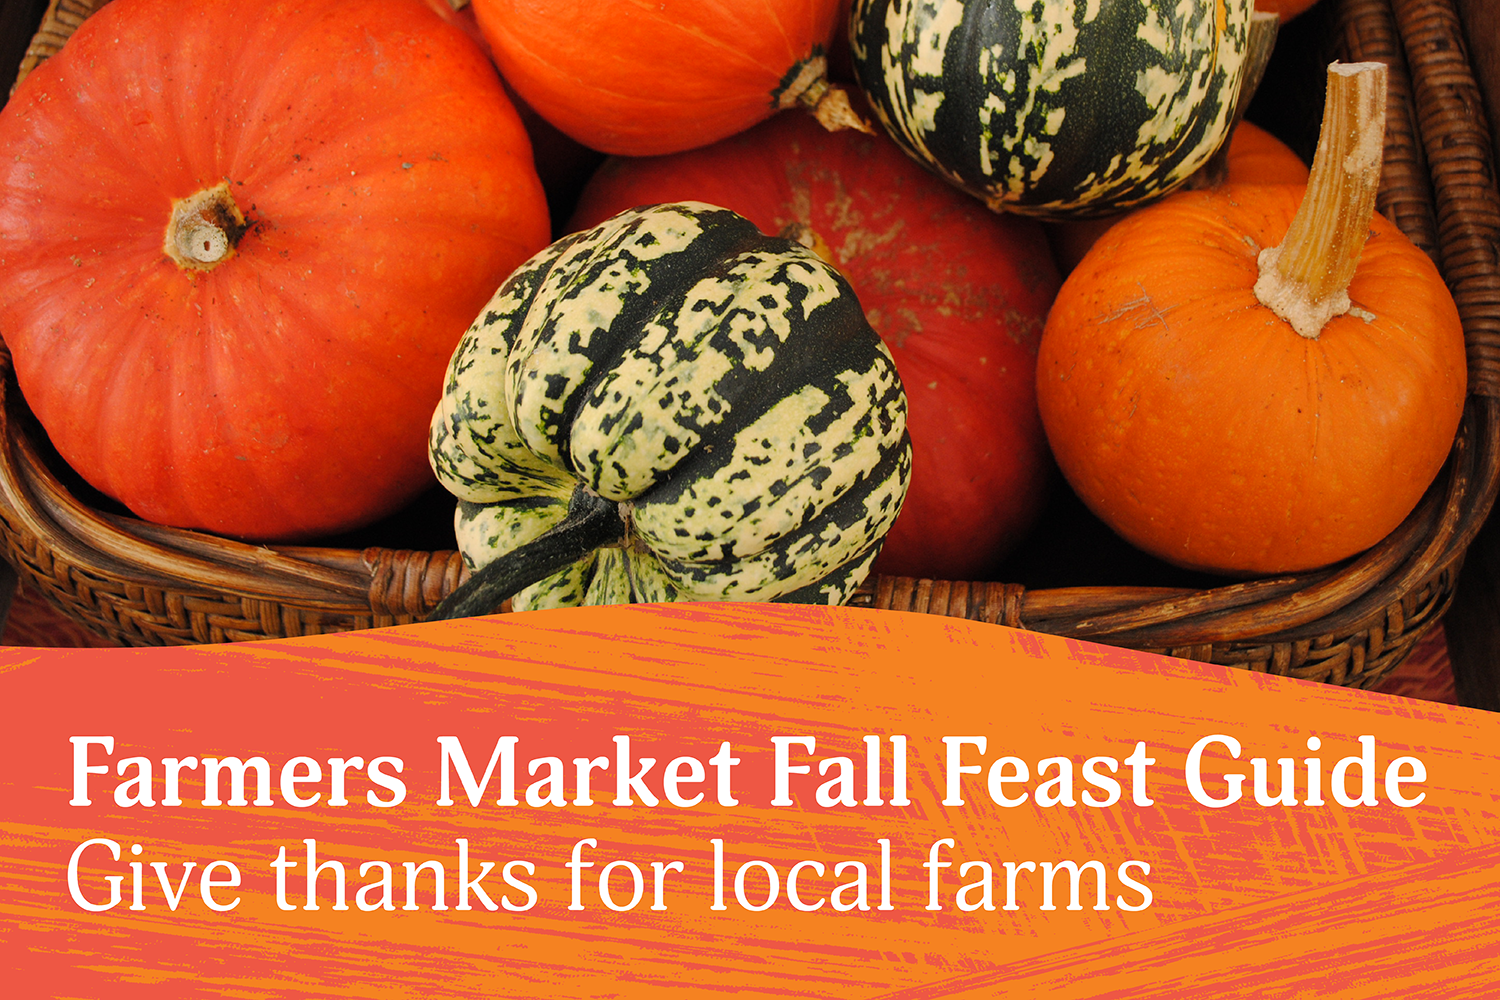 Foodwise Farmers Market Fall Feast Guide graphic with winter squash